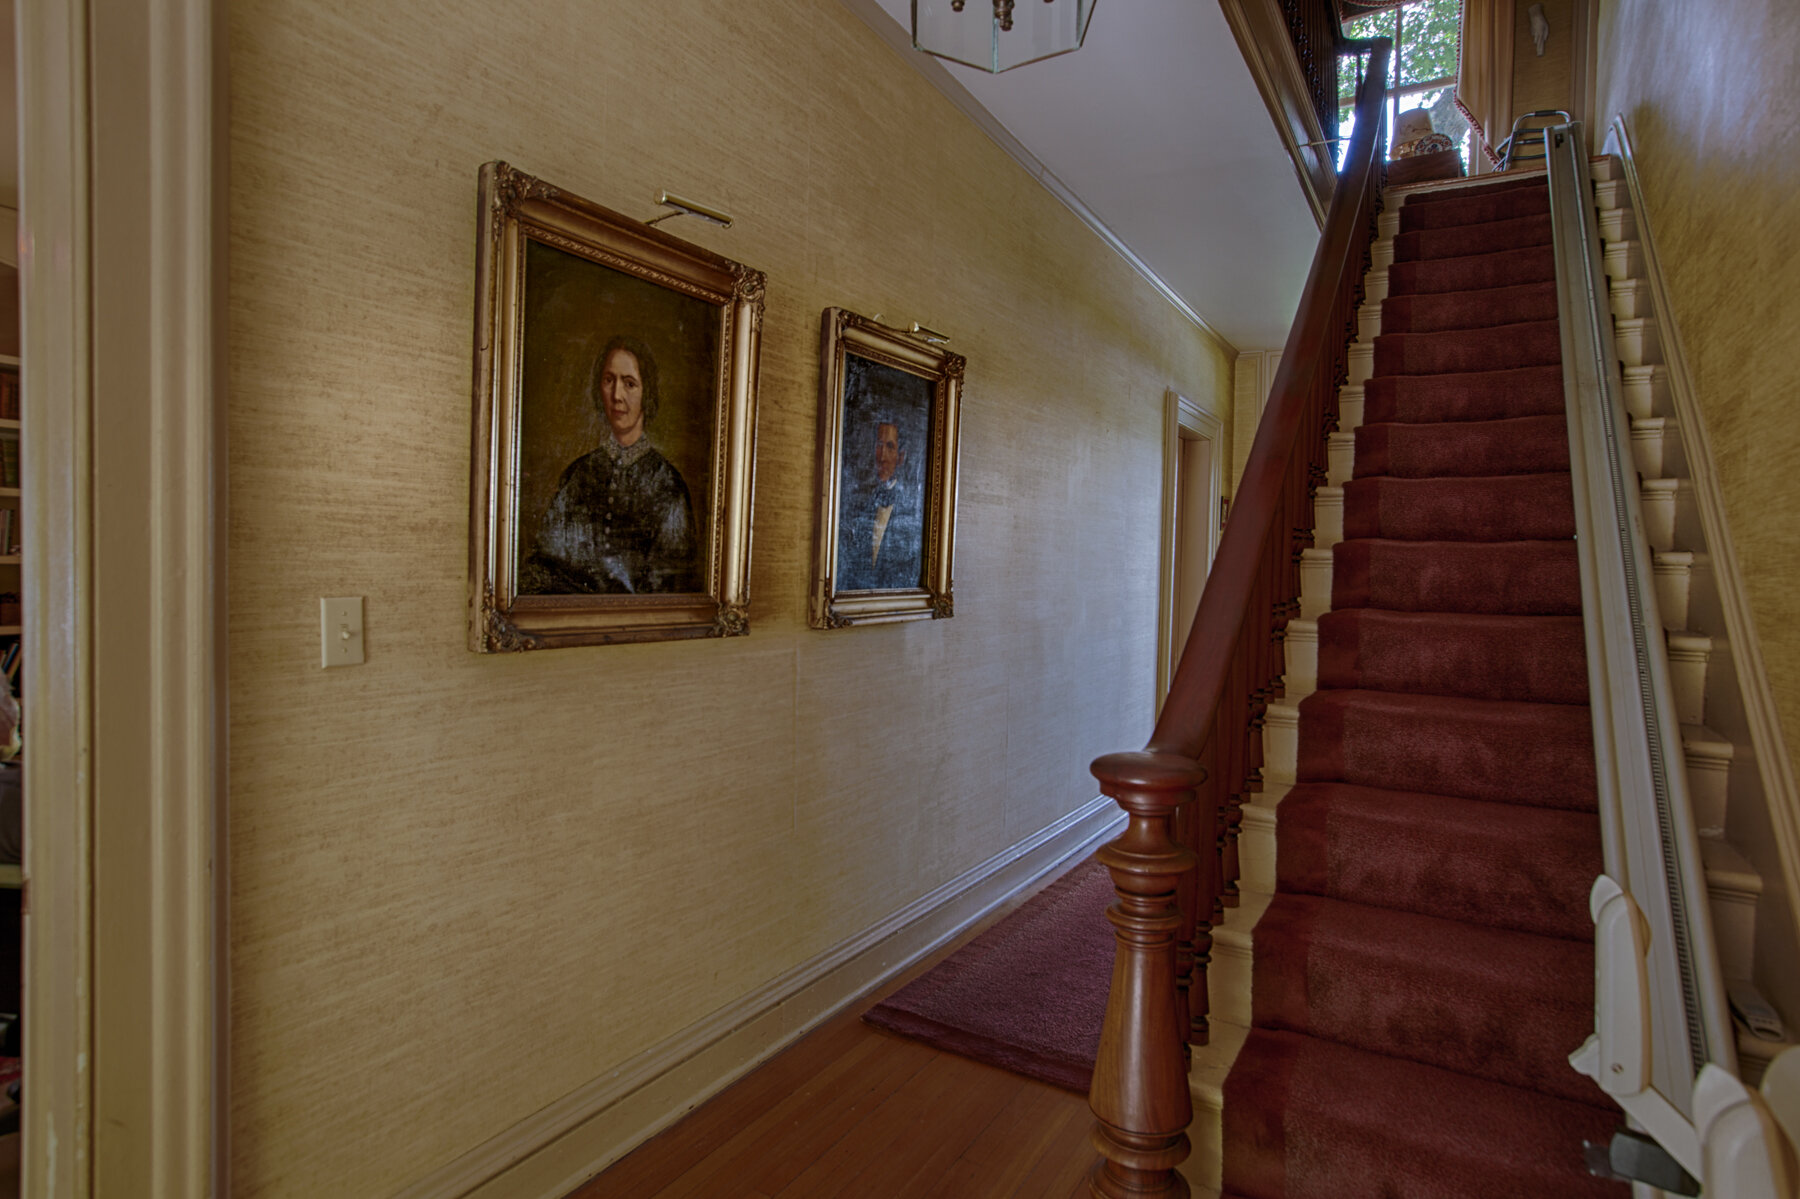  Staircase to the right with red carpeting. Two pictures hang on the wall to the left. 